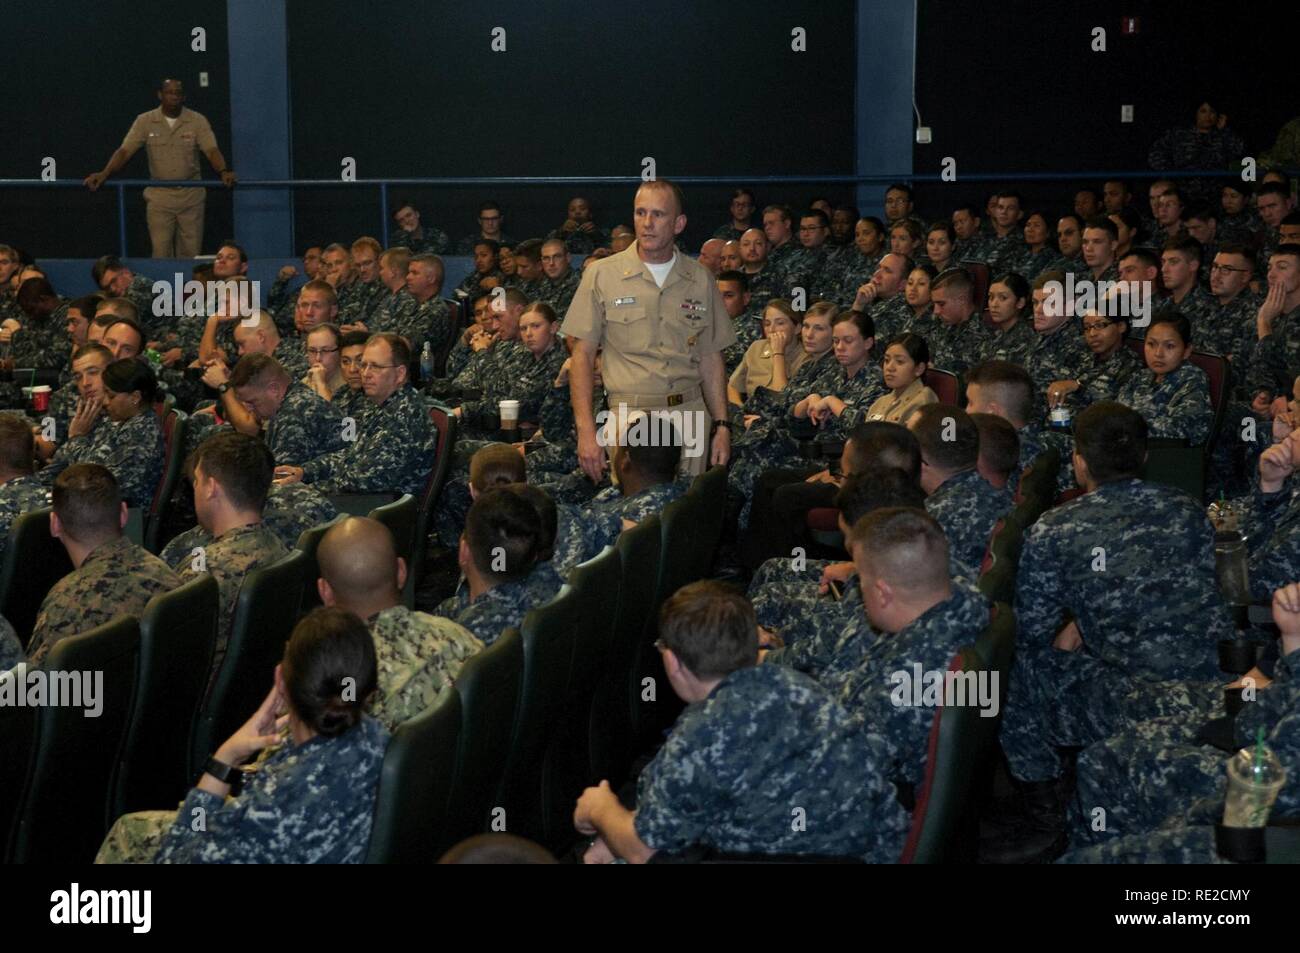 SAN DIEGO (Nov. 8, 2016) The 14th Master Chief Petty Officer of the Navy (MCPON) Steven Giordano speaks with Sailors during an all-hands call at Naval Base San Diego. MCPON addressed current issues in the Navy and participated in a question-and-answer session with Sailors. This is Giordano's first visit to Naval Base San Diego since taking office as the 14th MCPON. Stock Photo